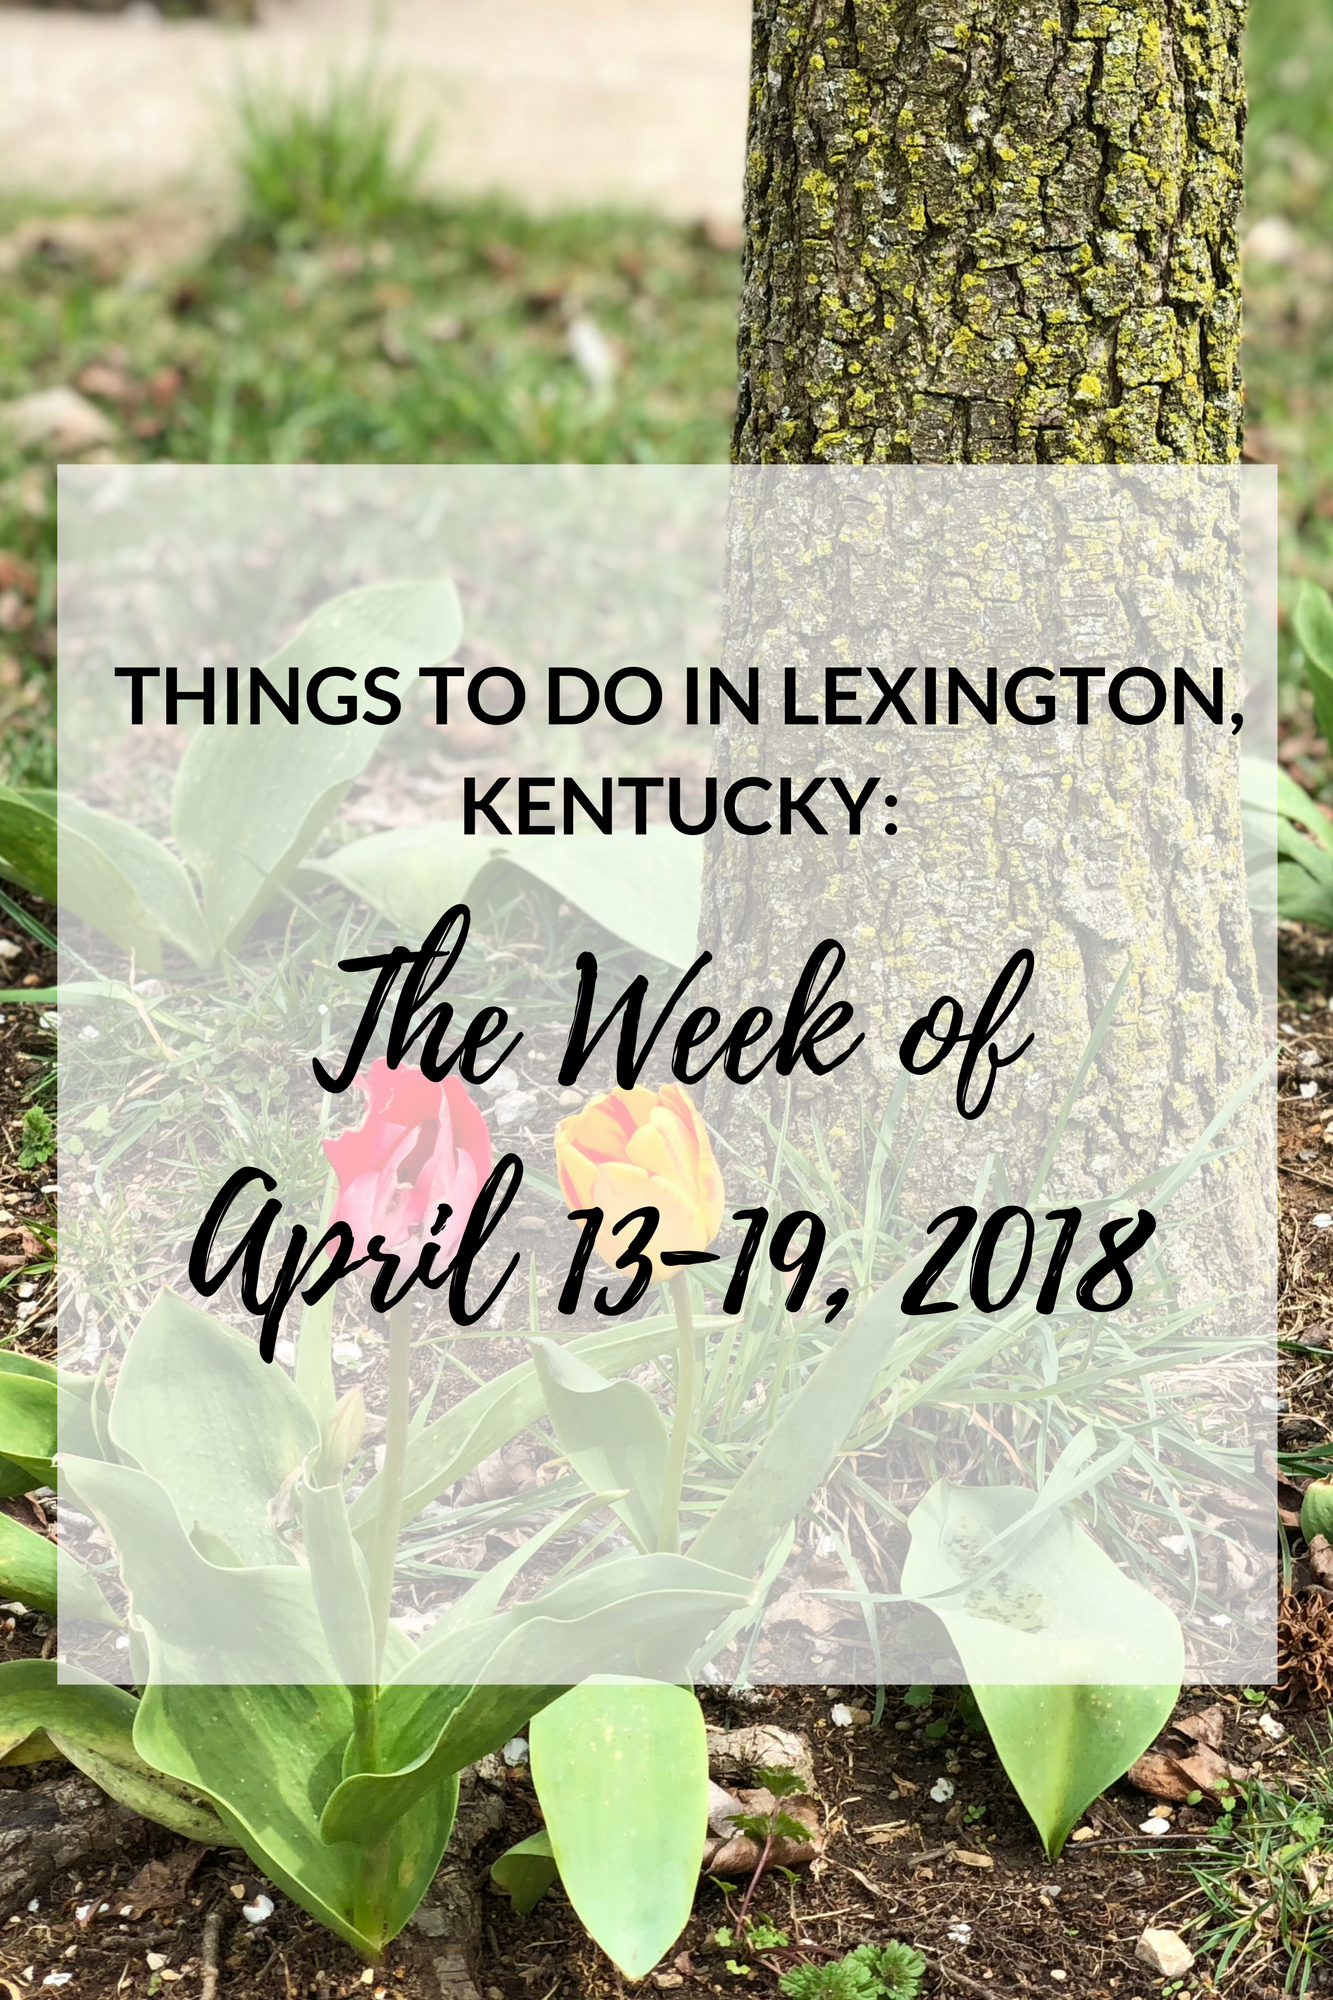 It's Friday the 13th, but don't let frighten you! It's 80 degrees outside. I guess we all better enjoy it while we can, because there is rain in the forecast! Let's see what fun awaits us all this coming week... Things to Do in Lexington, Kentucky: The Week of April 13-19, 2018